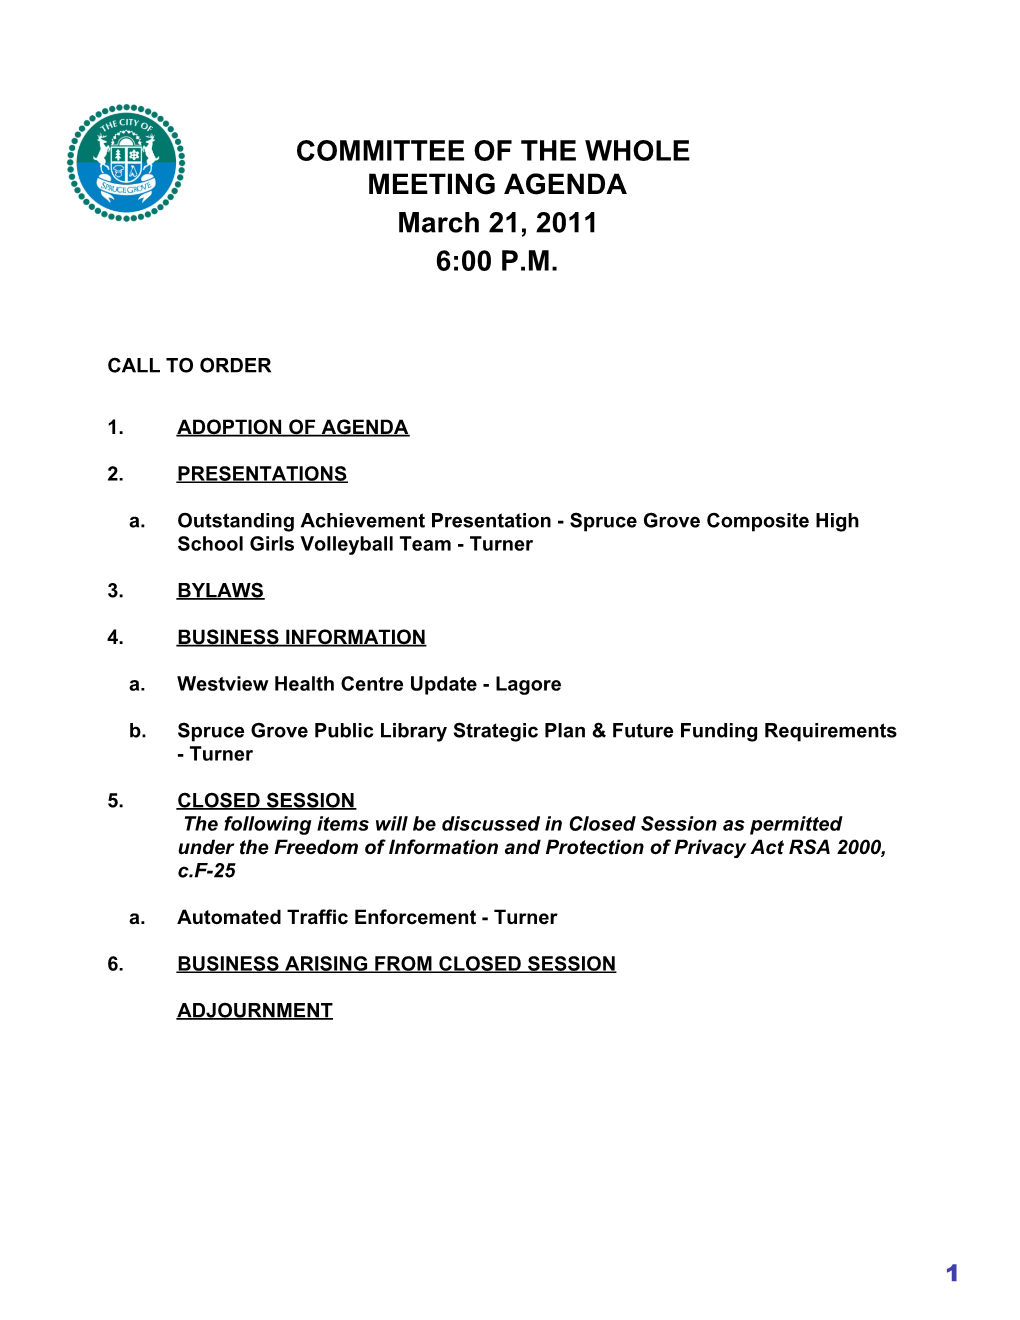 COMMITTEE of the WHOLE MEETING AGENDA March 21, 2011